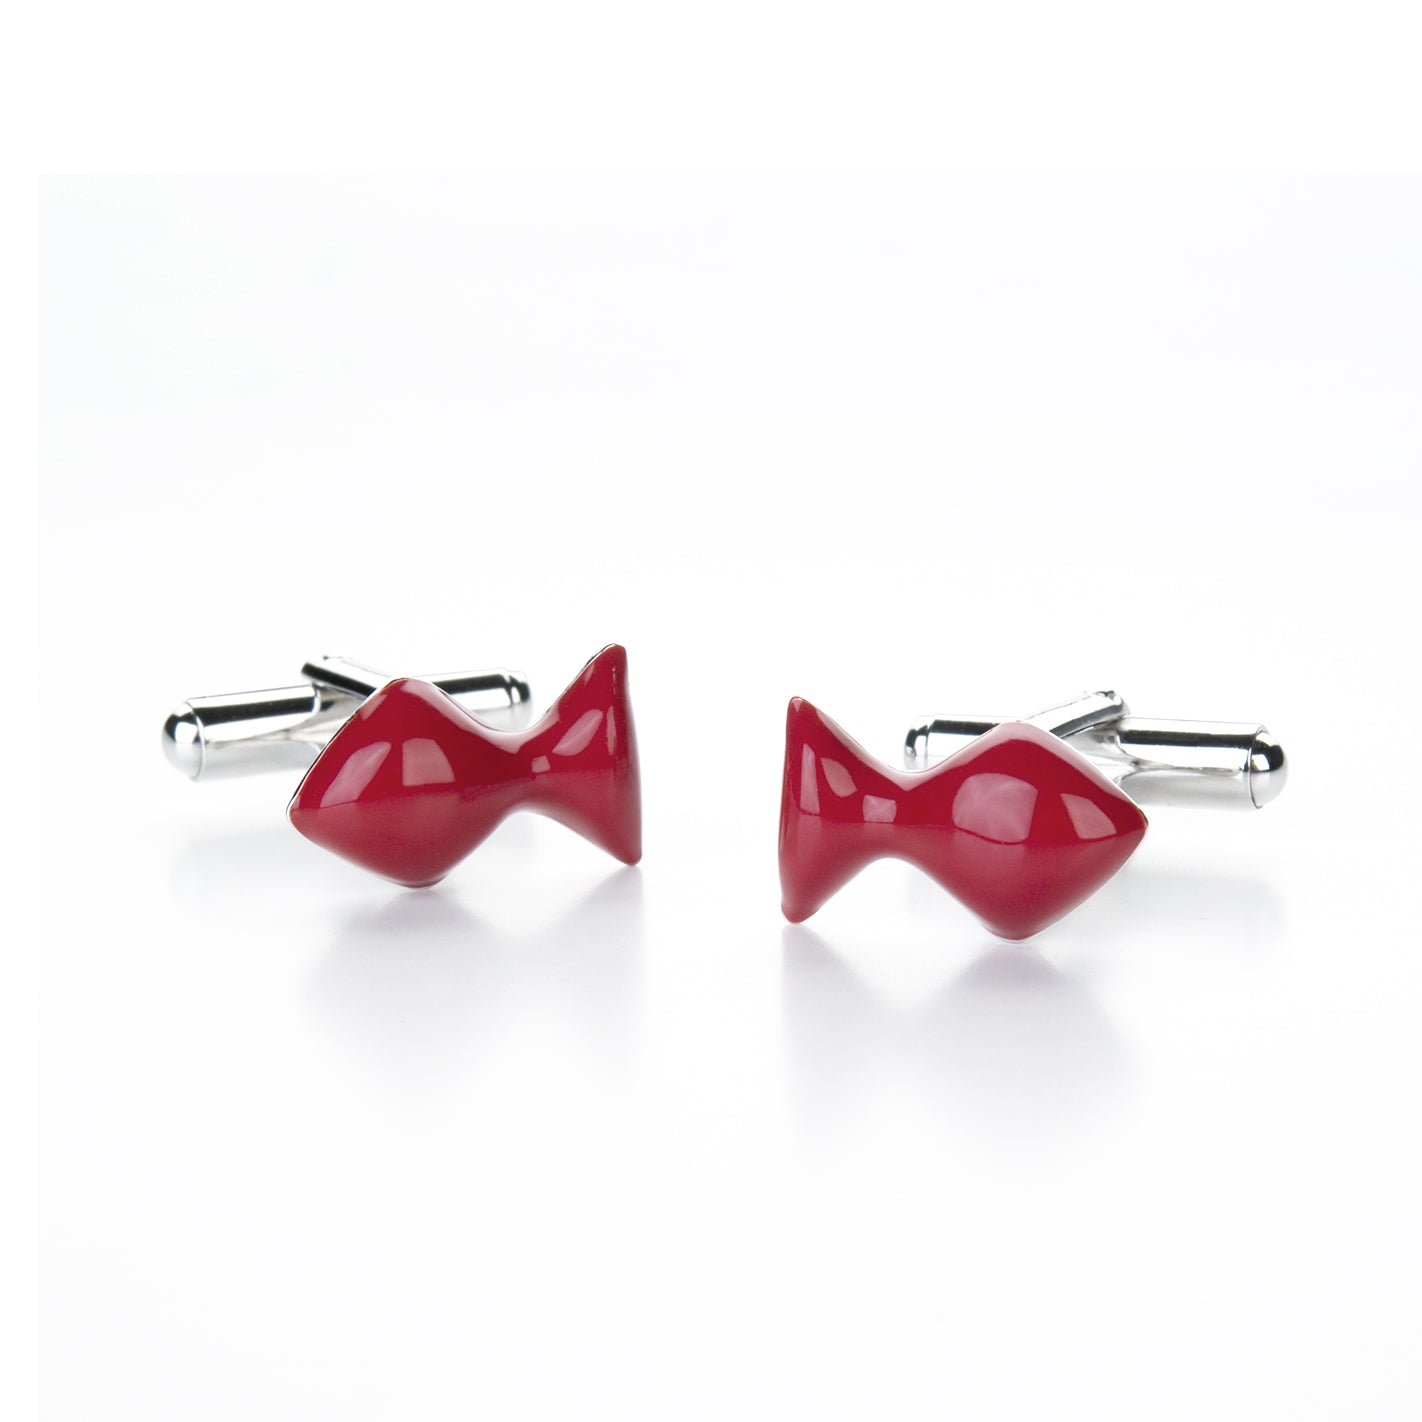 Little fish cufflinks in silver and red enamel